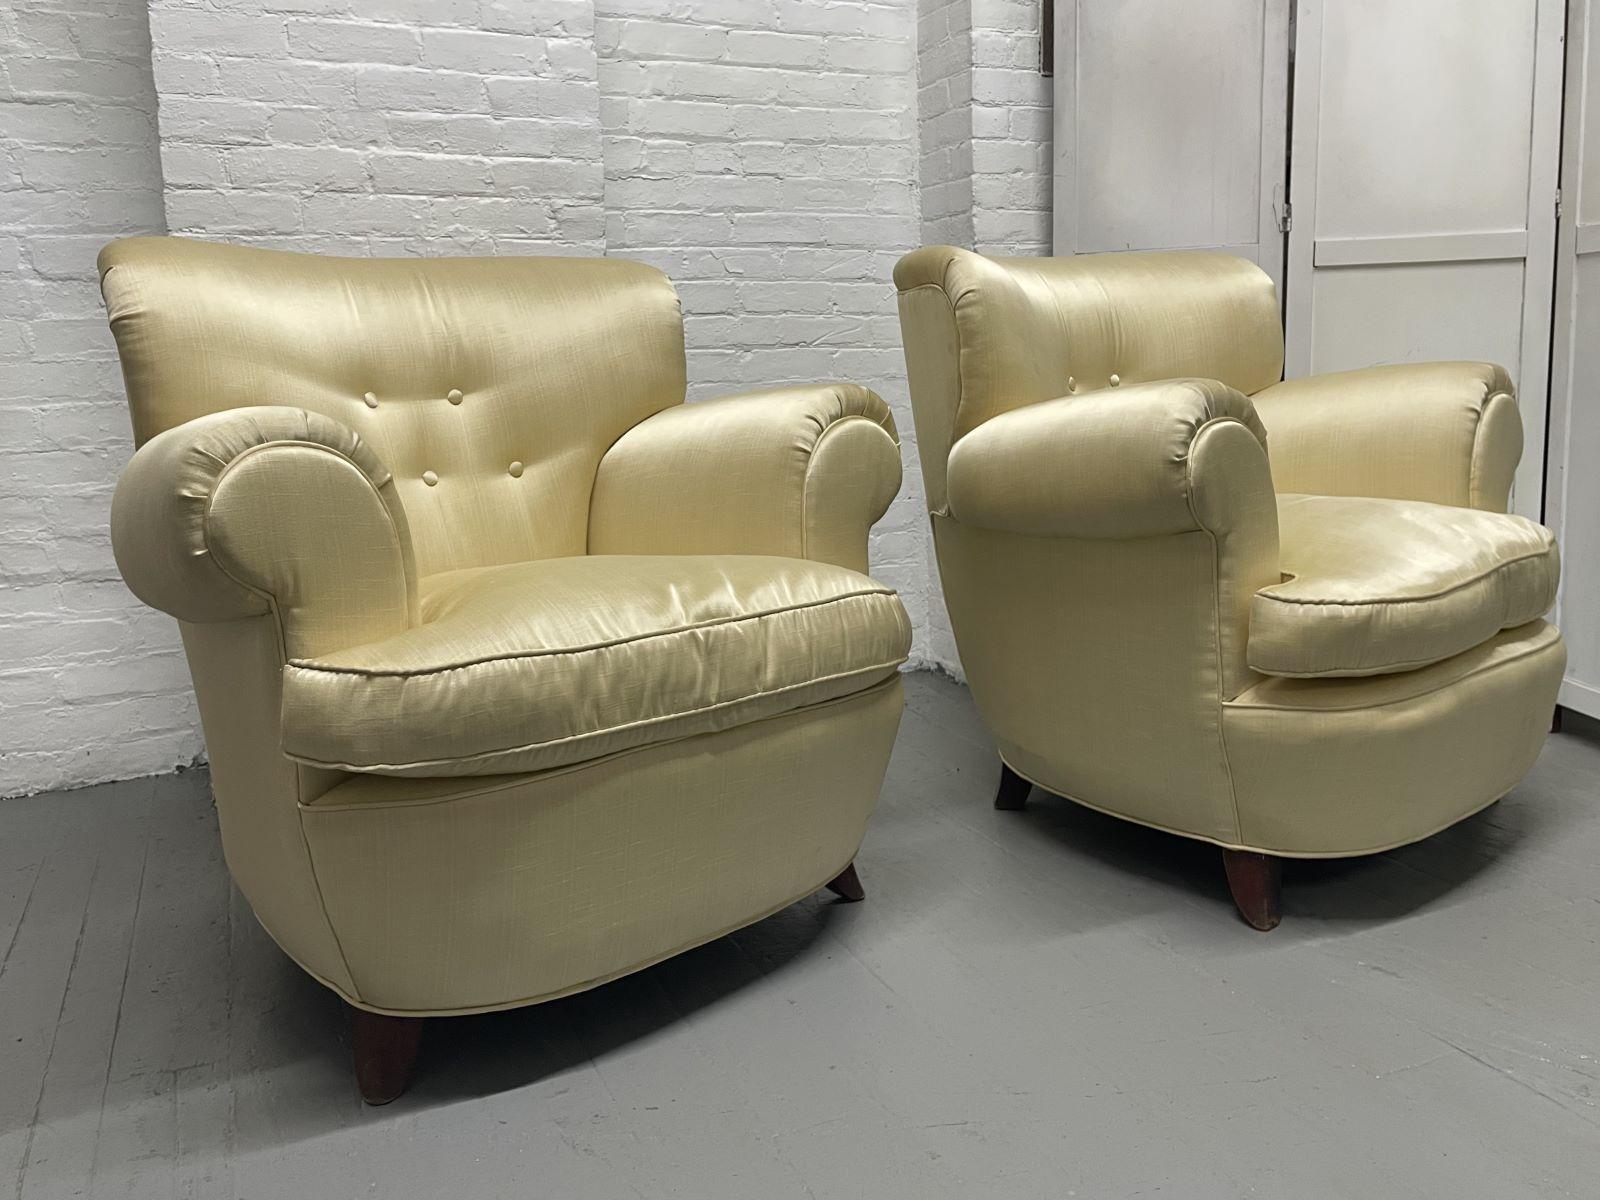 1940s pair of French lounge chairs that are nicely upholstered in silk with rolled arms and loose down filled seat cushions. The chairs have flared mahogany legs.